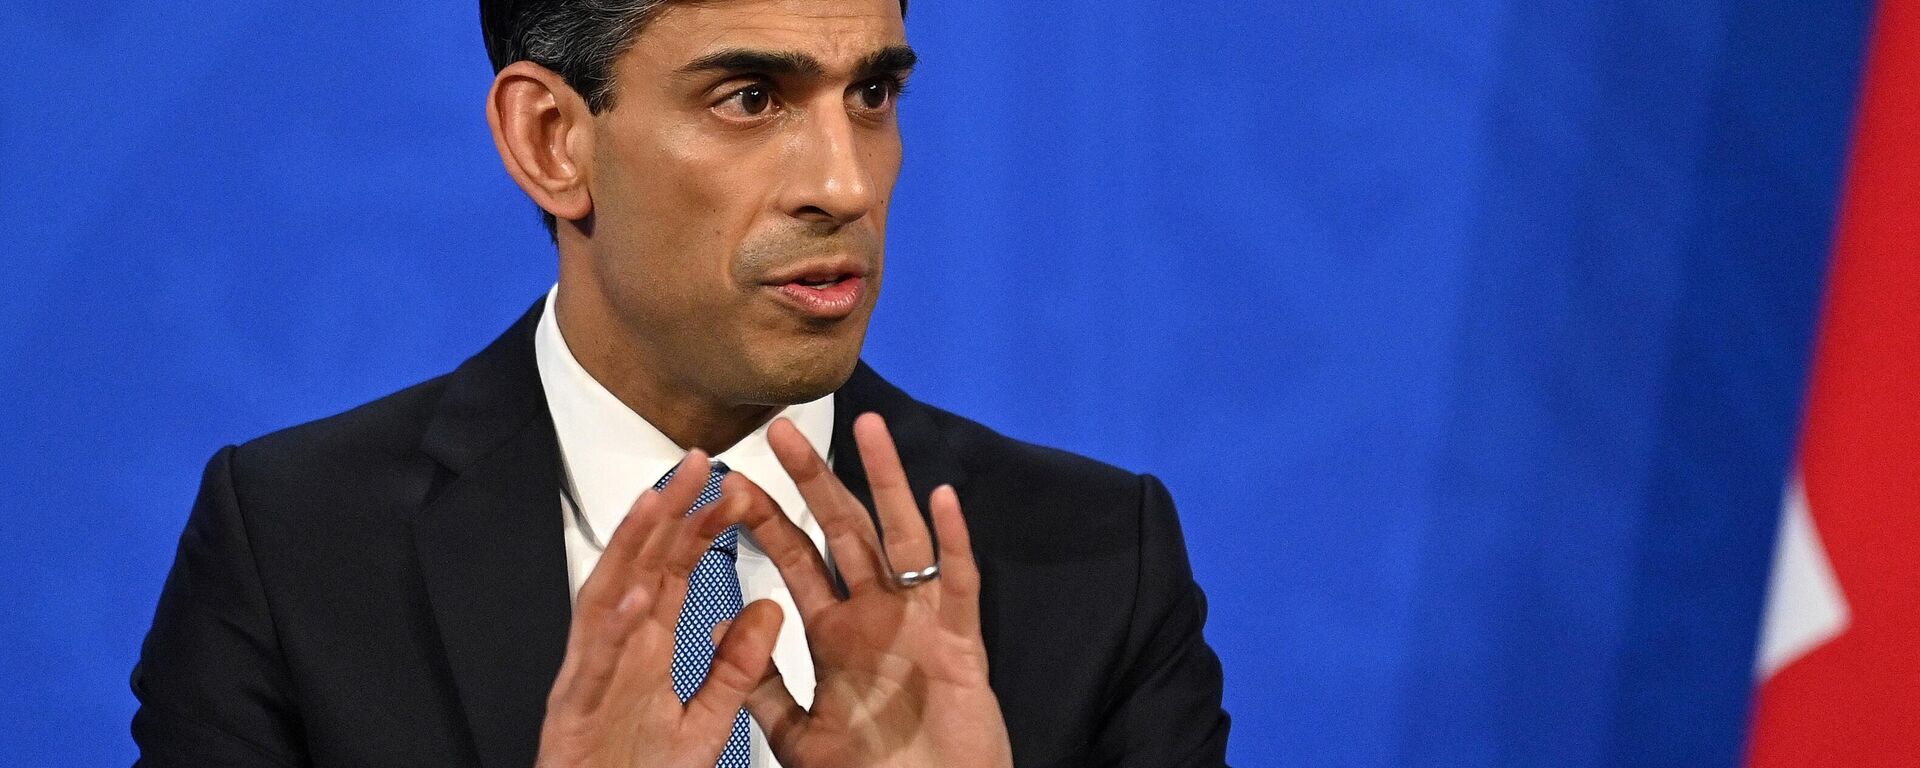 Britain's Chancellor of the Exchequer Rishi Sunak hosts a press conference in the Downing Street Briefing Room on February 3, 2022 - Sputnik International, 1920, 13.07.2022